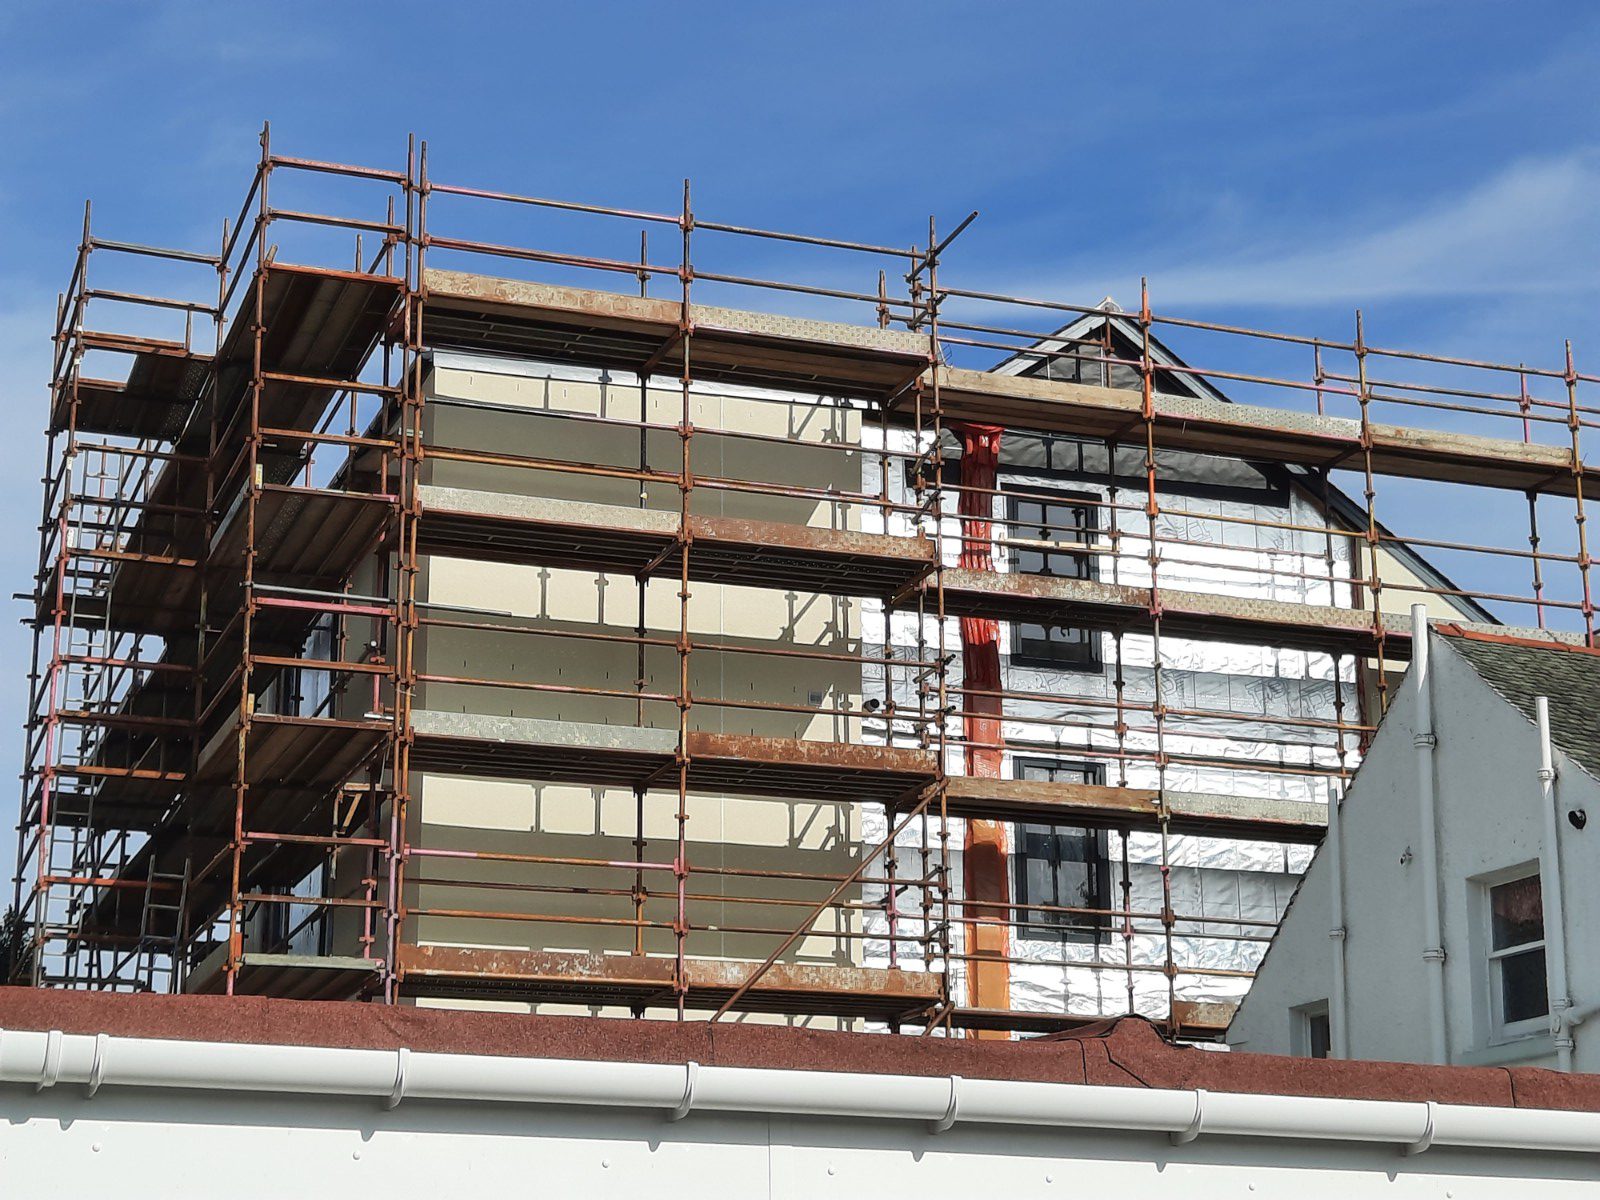 Multi-storey Apartments Block with Silicone Render Finish